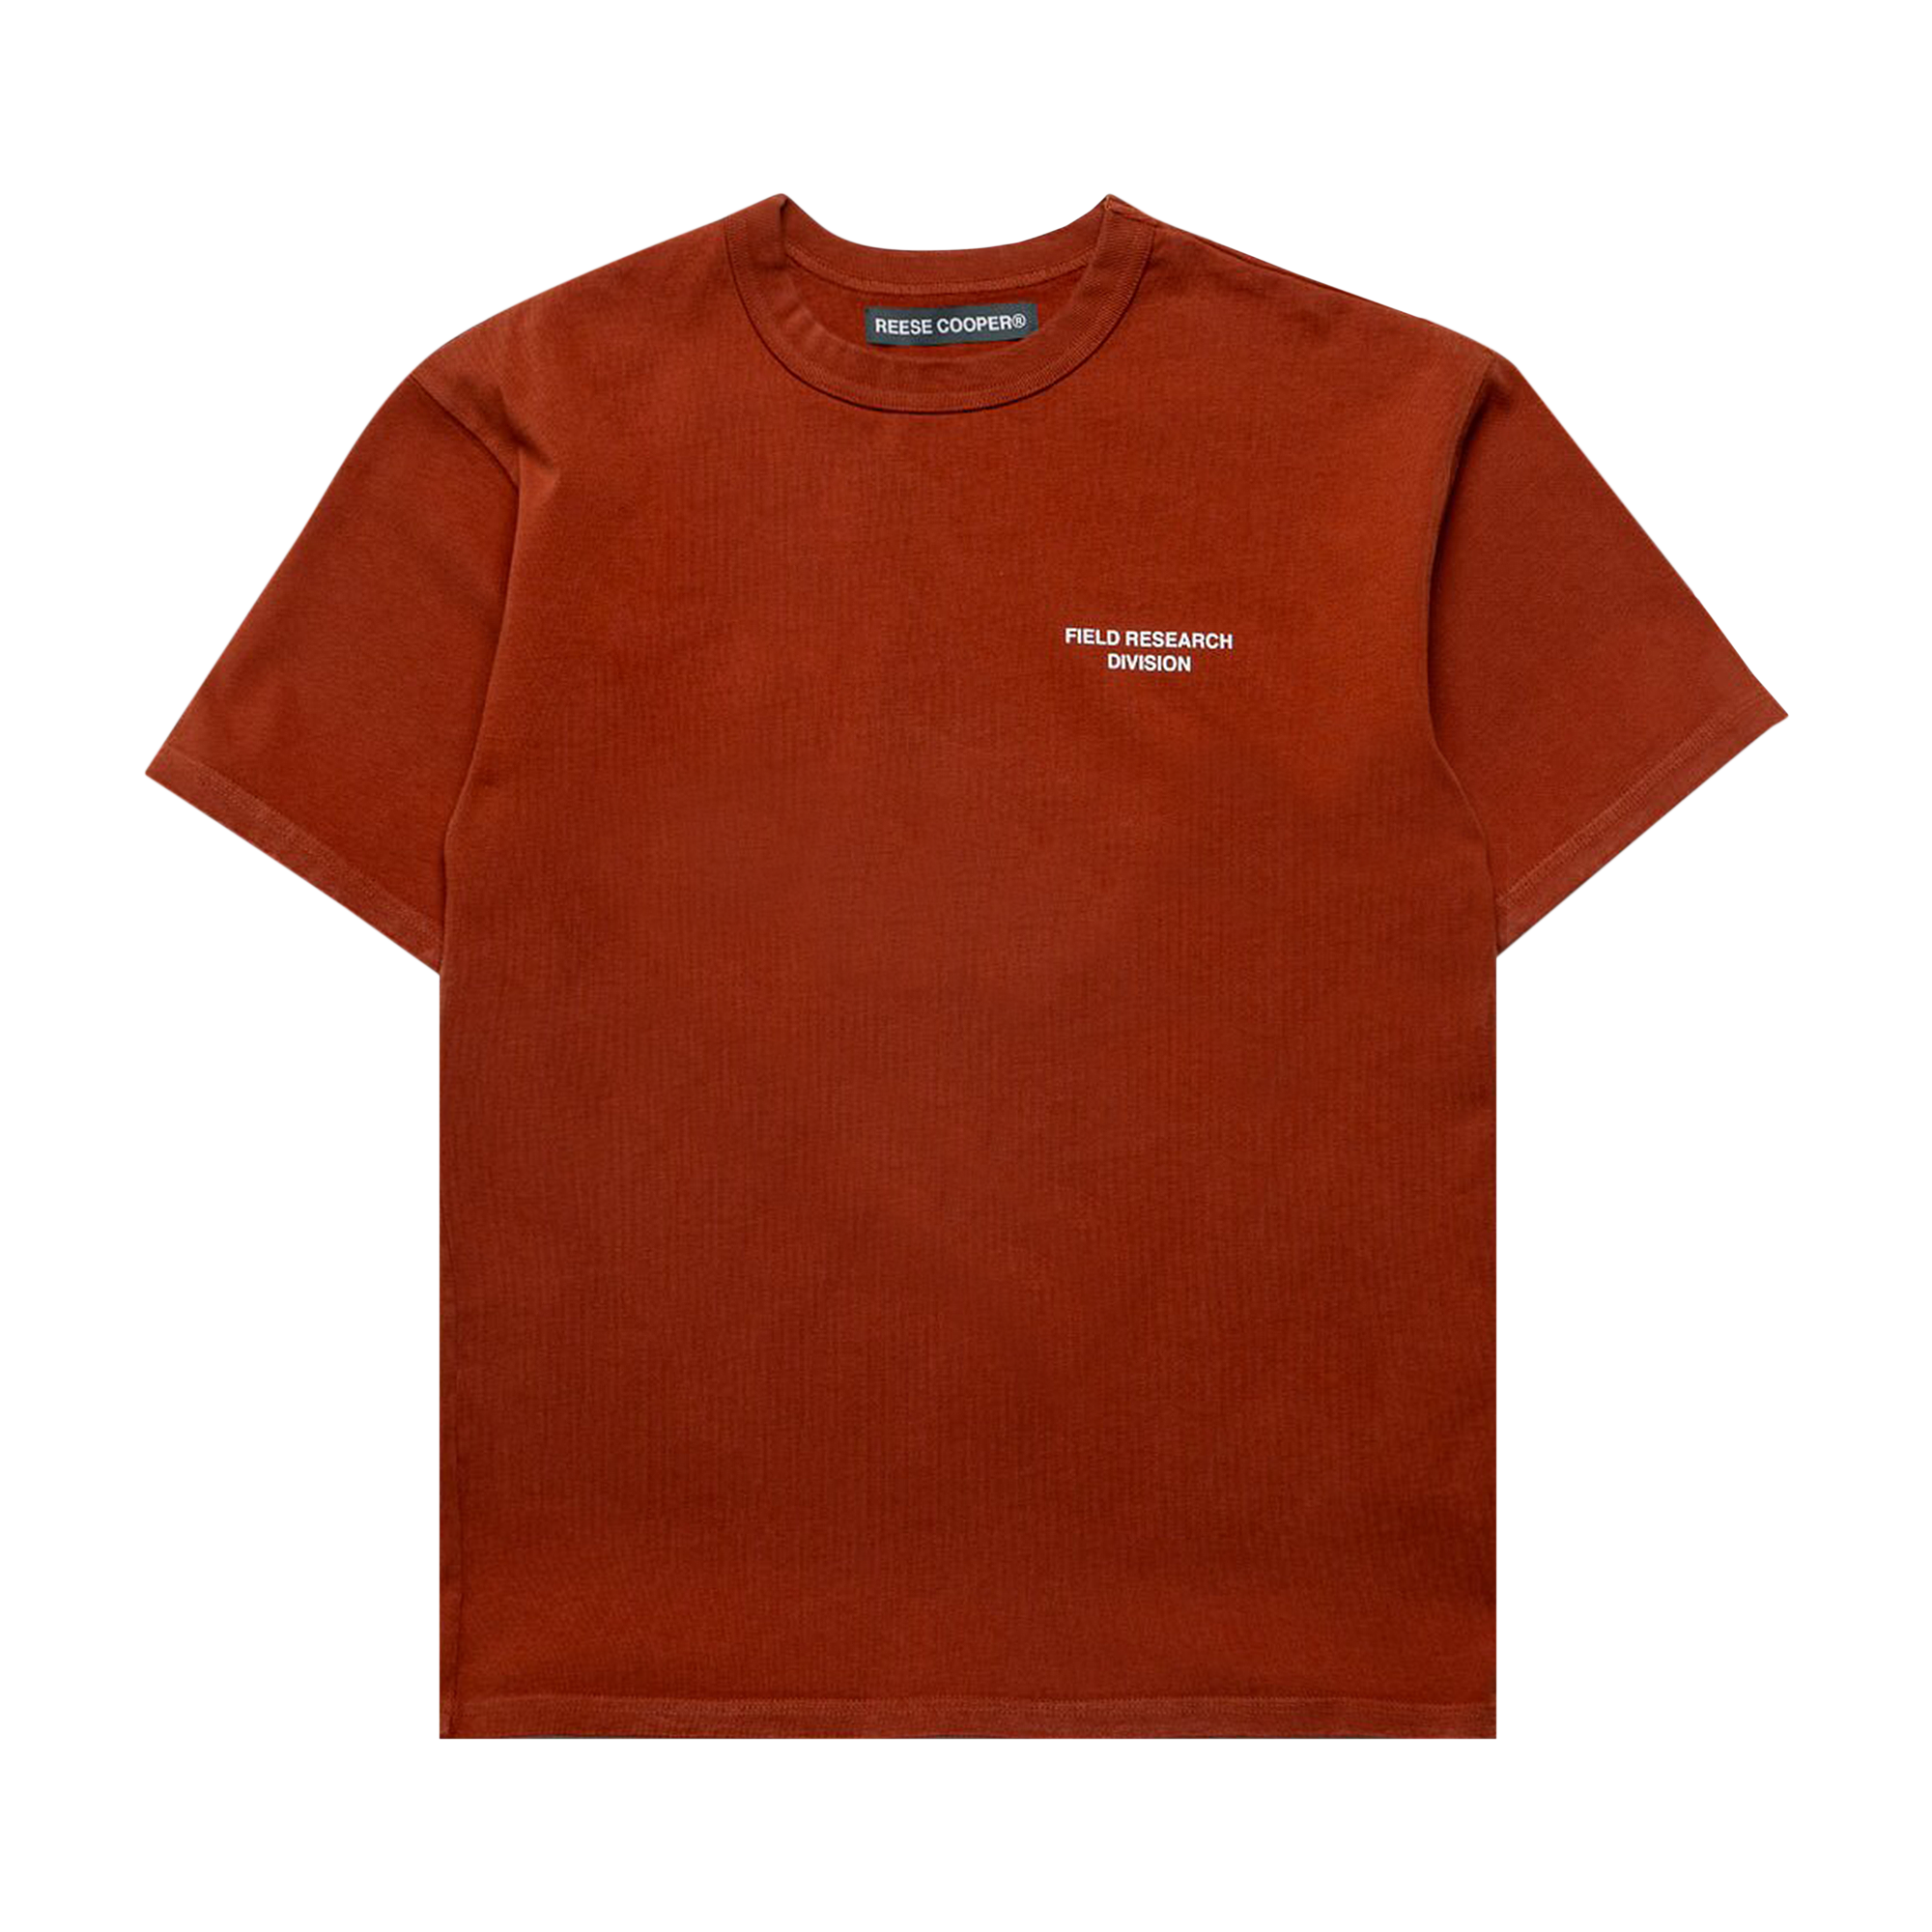 Pre-owned Reese Cooper Field Research Division Tee 'burnt Orange'